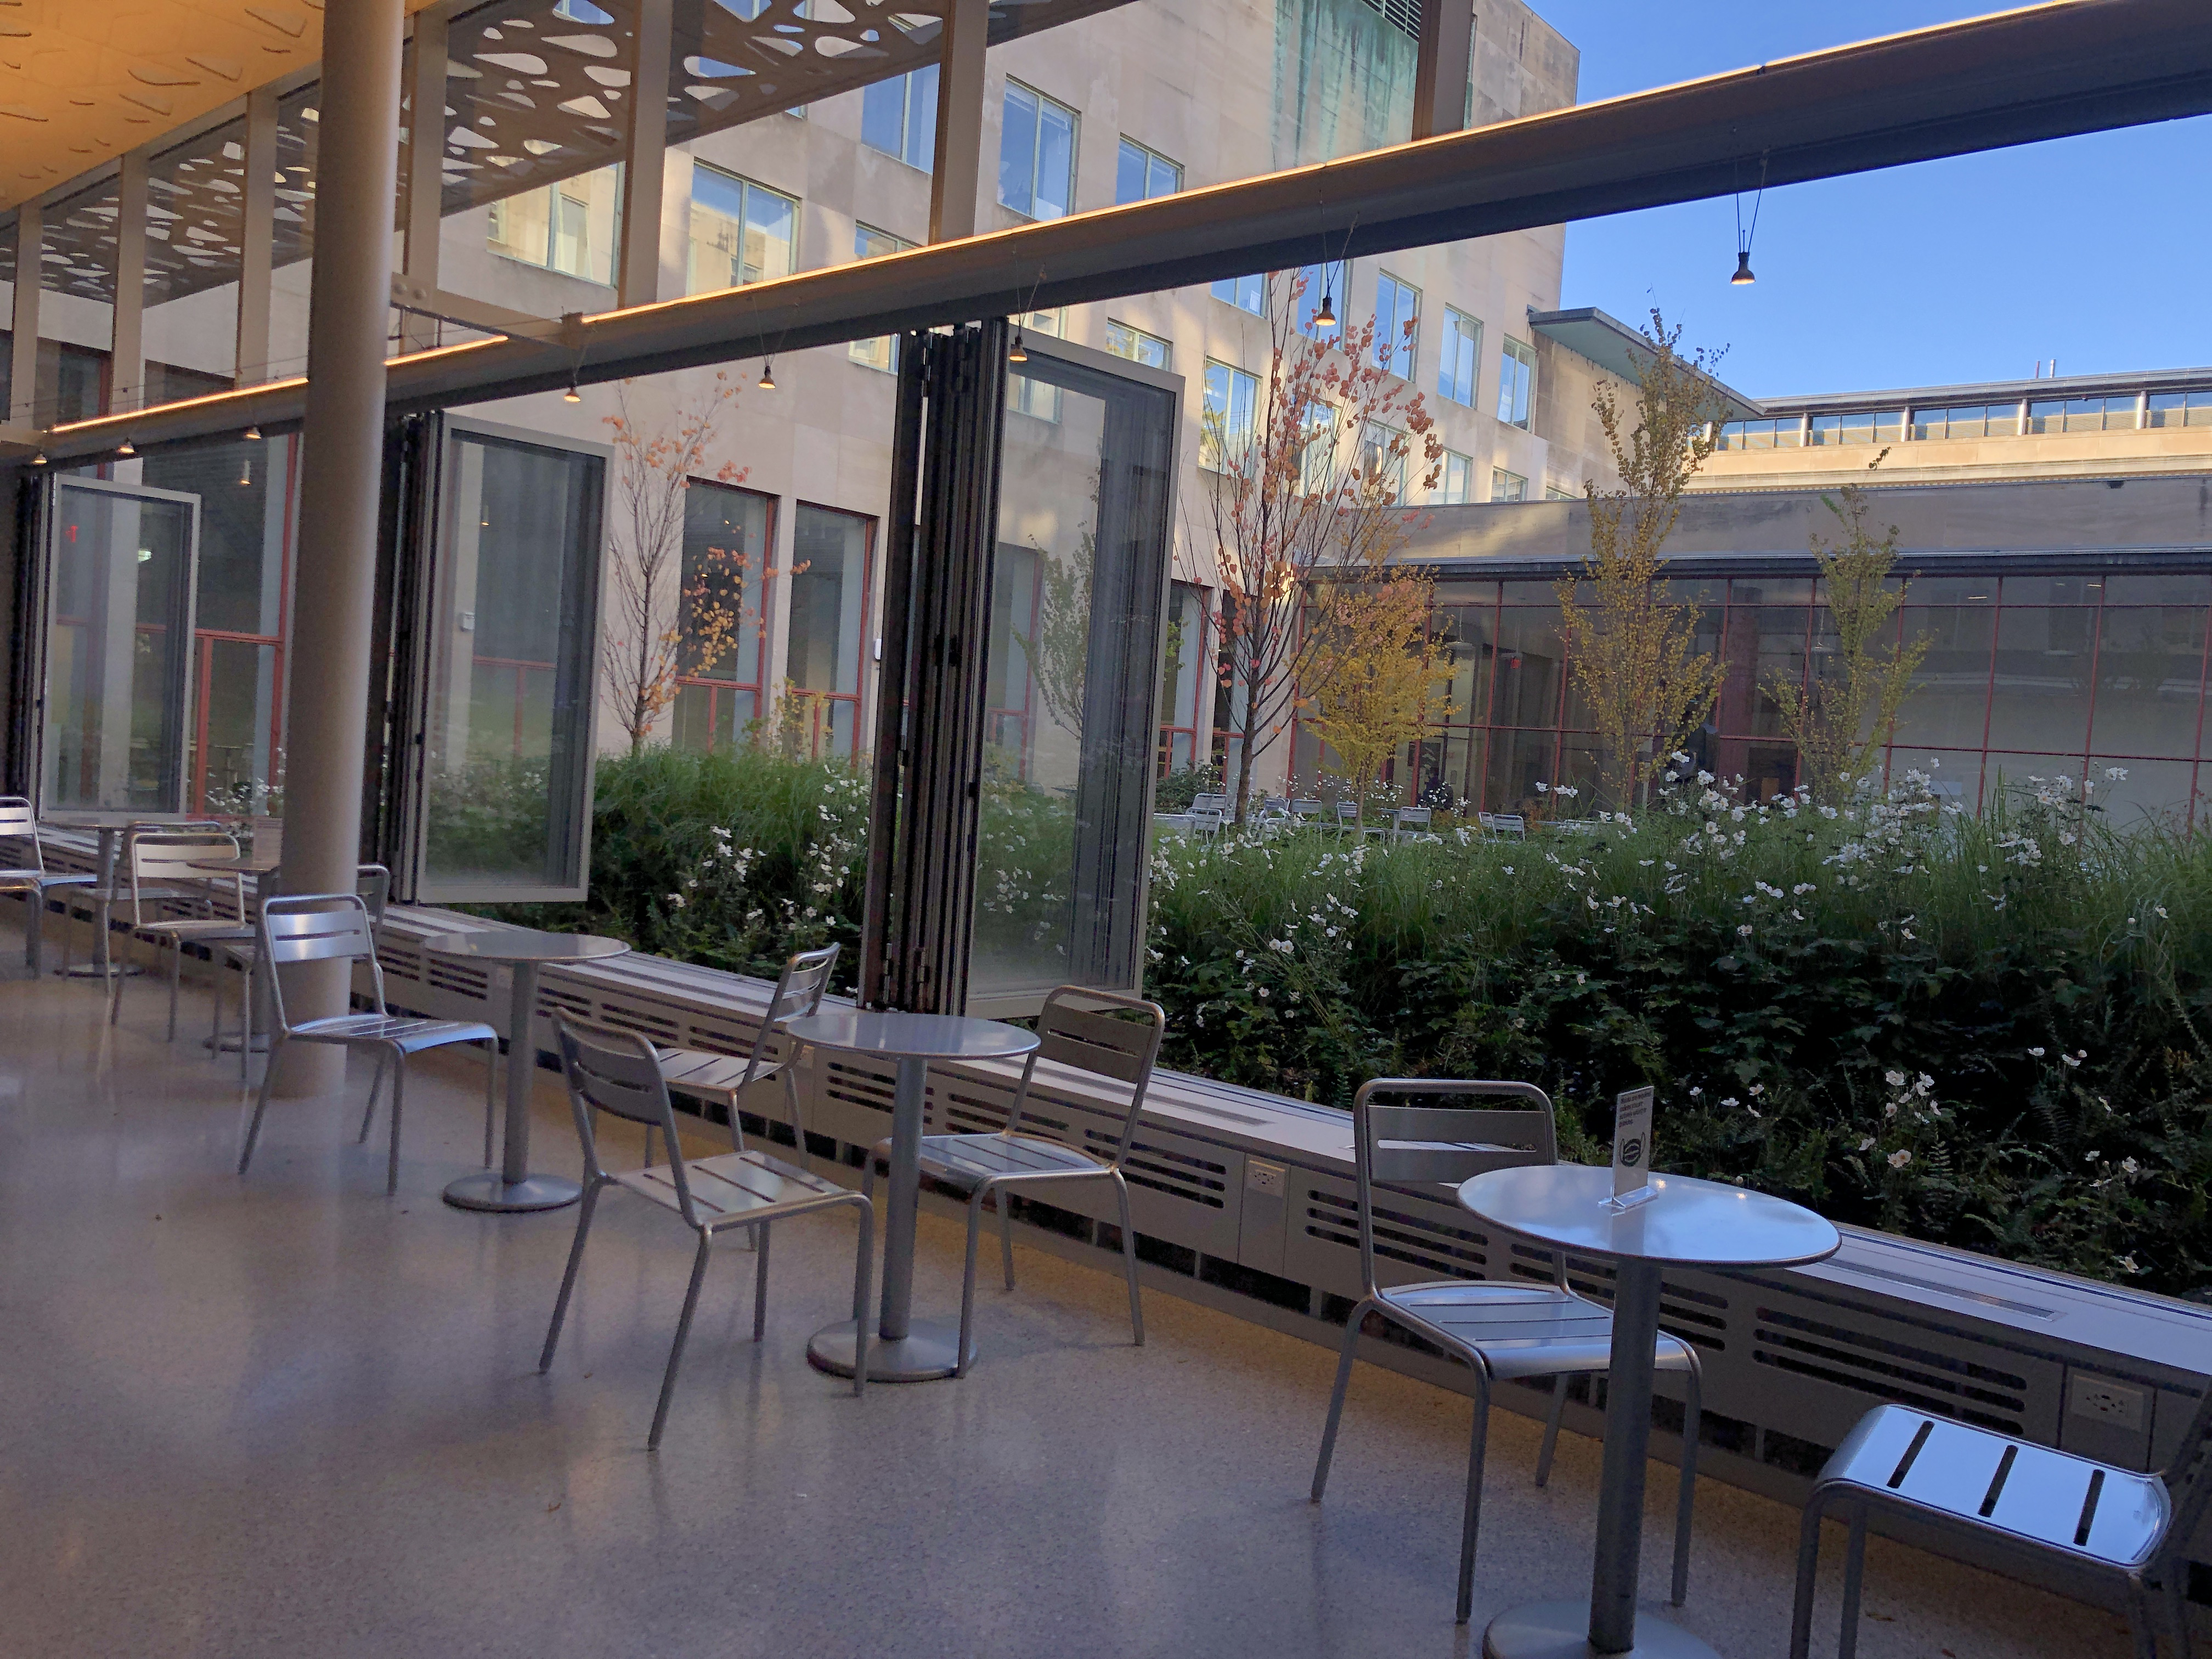 tables and windows opening into a courtyard